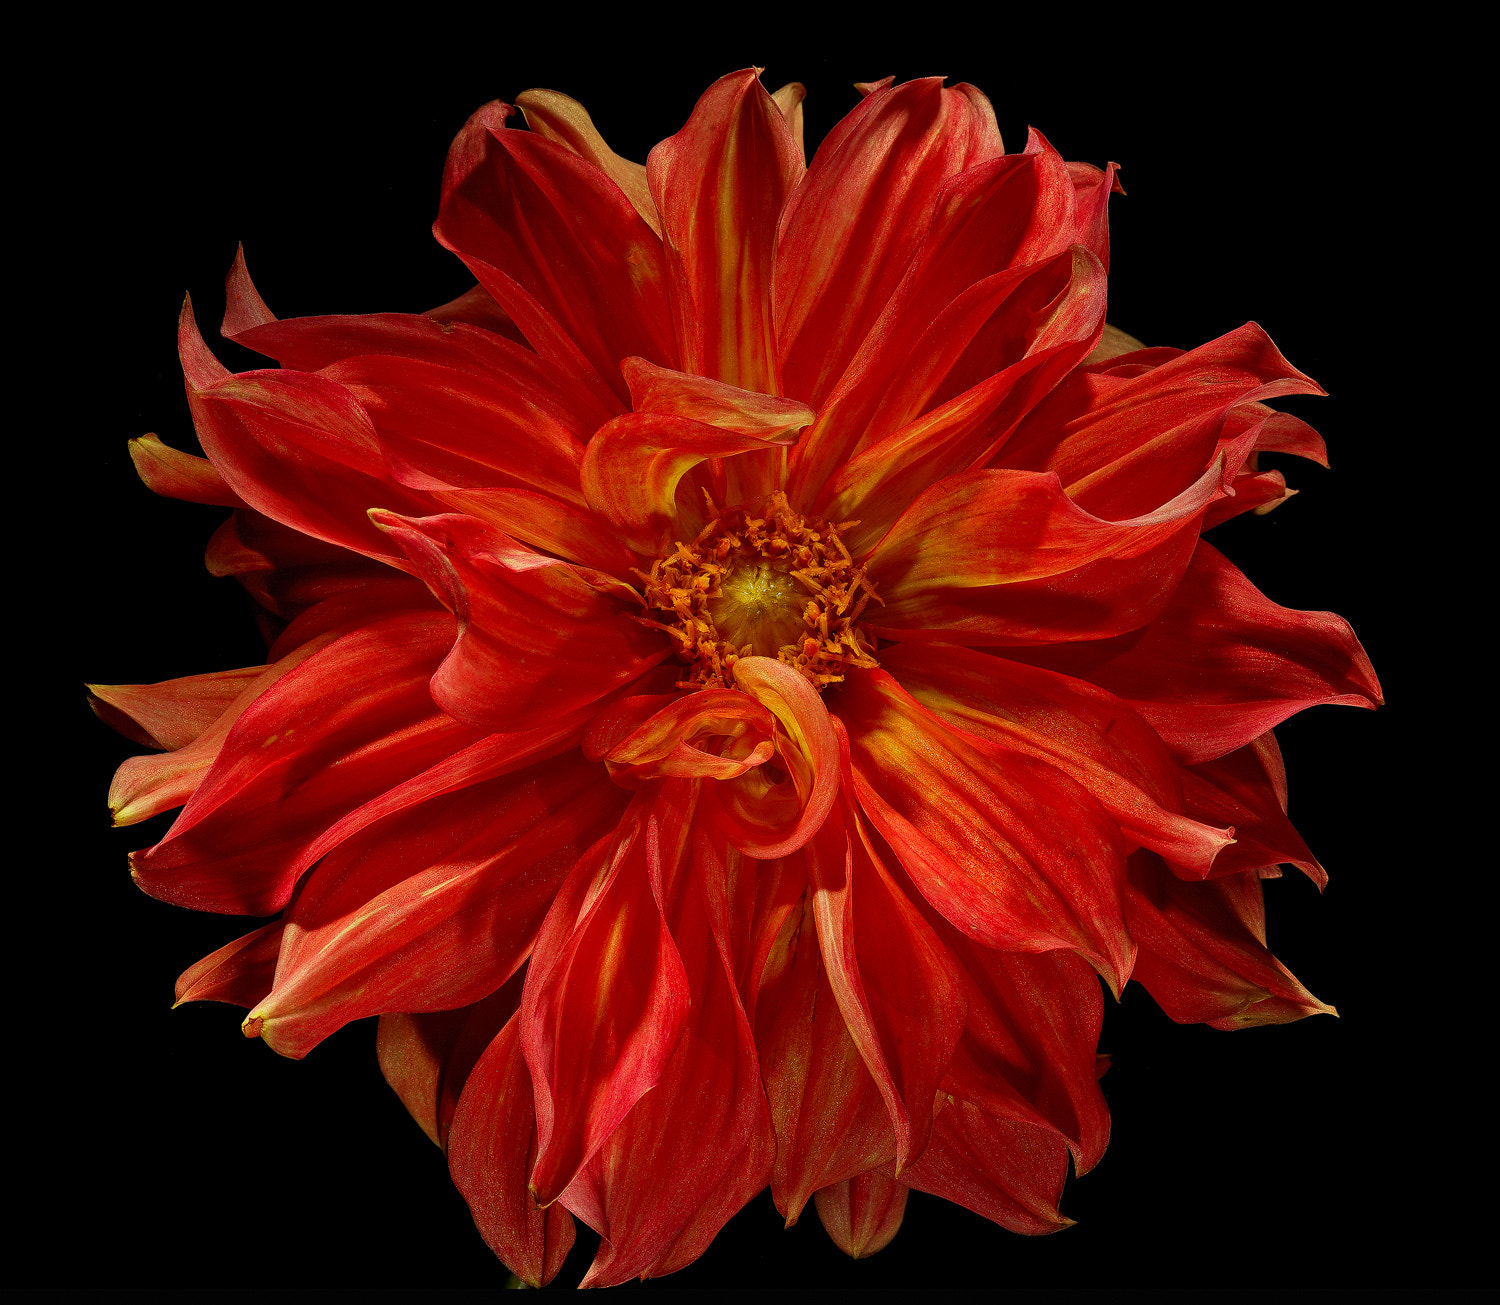 100mm F2.8 SSM sample photo. Curly flames dahlia photography